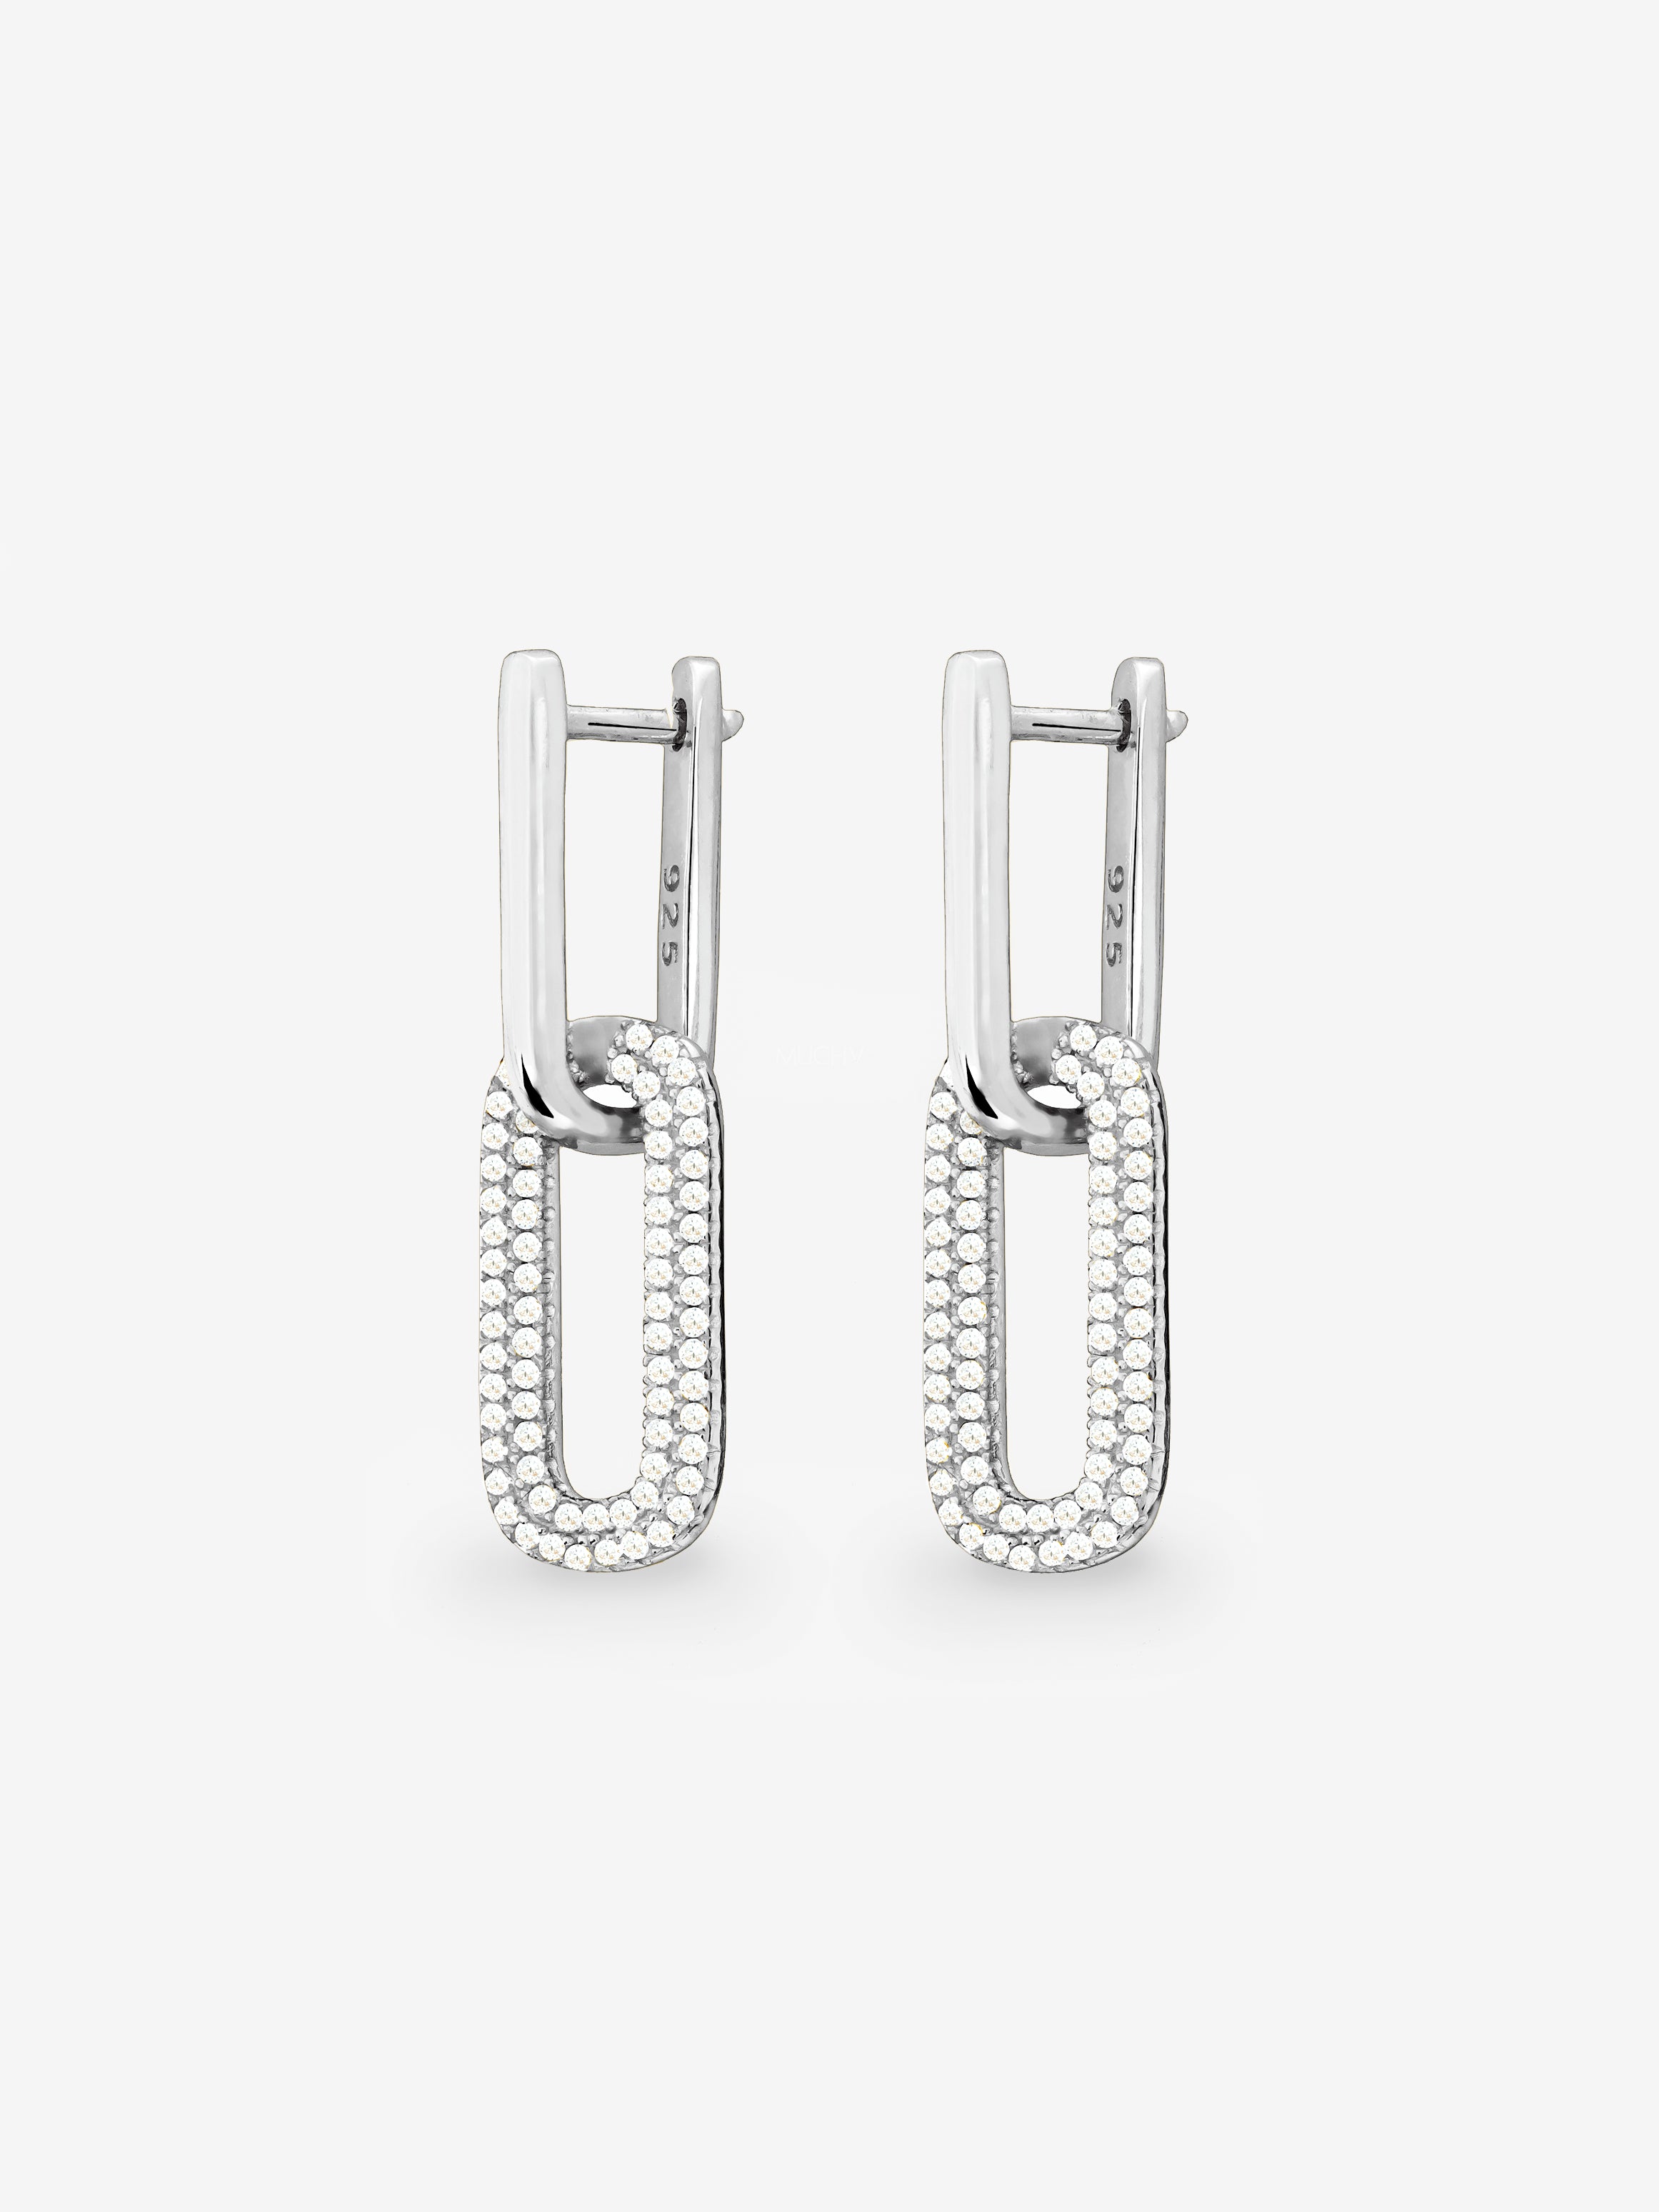 Silver Chain Hoop Earrings With Removable Oval Charms